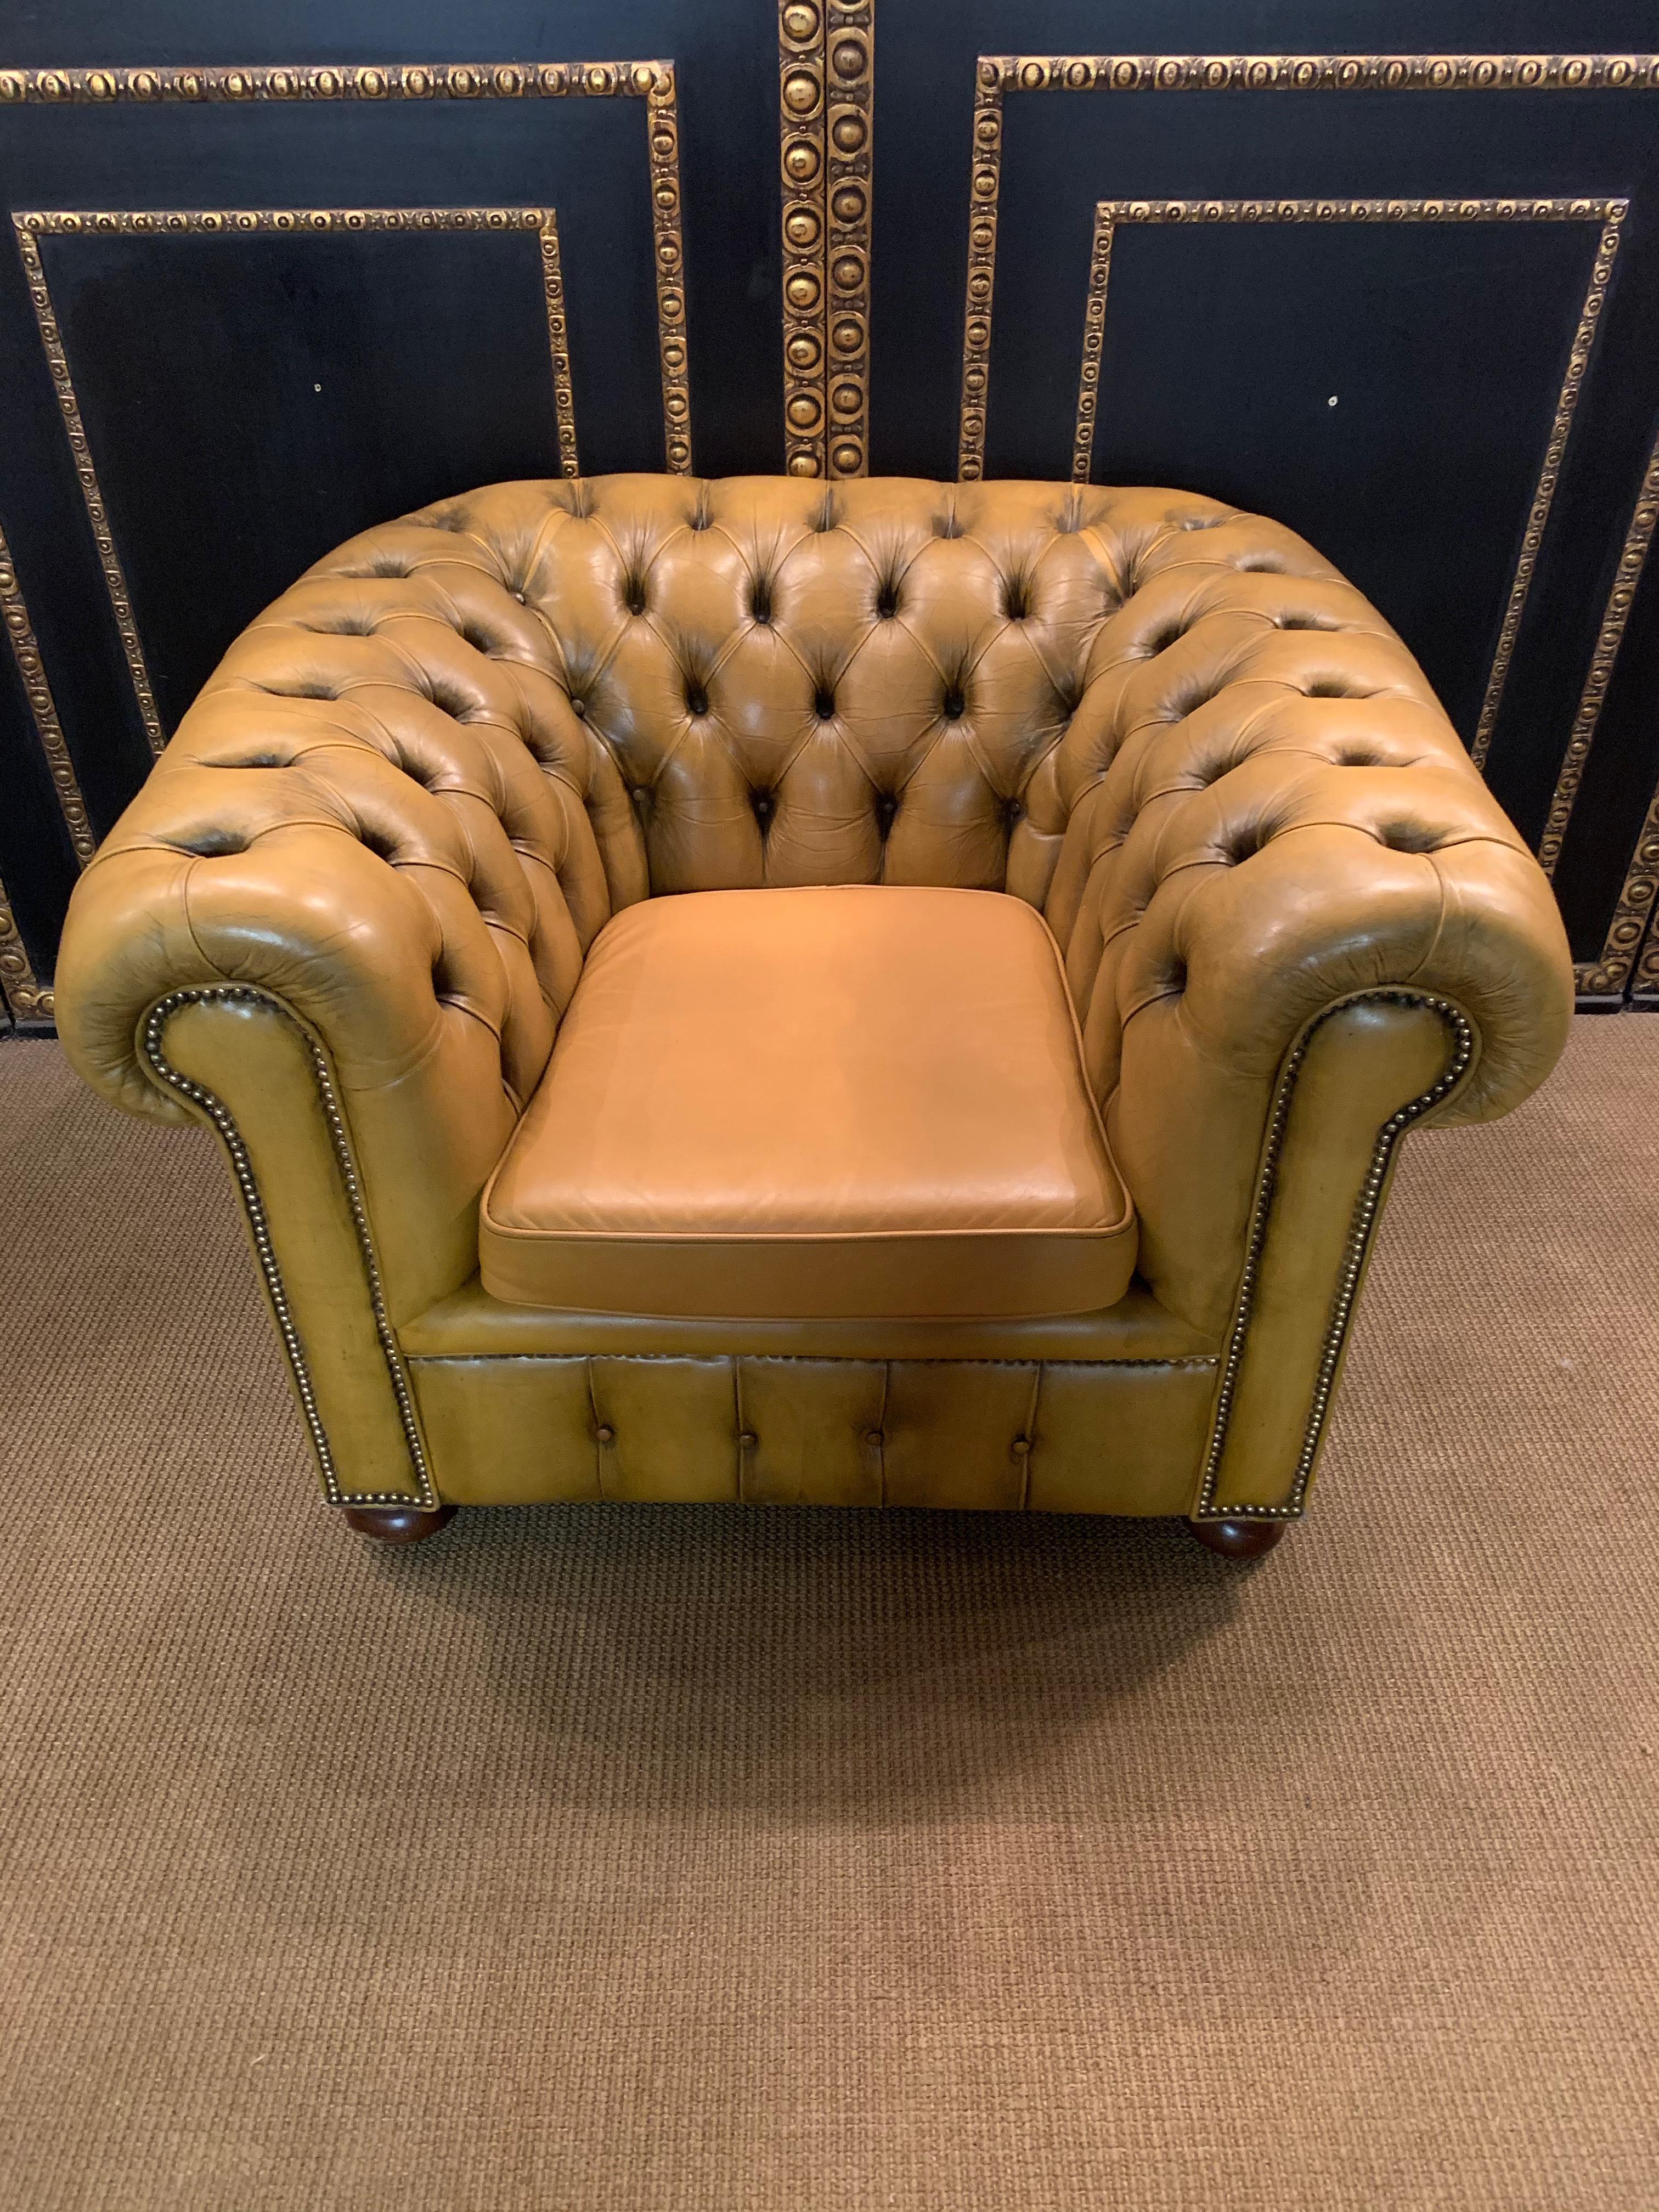 Mustard Yellow original Leather Chesterfield Club Suite set Armchair and Sofa 6